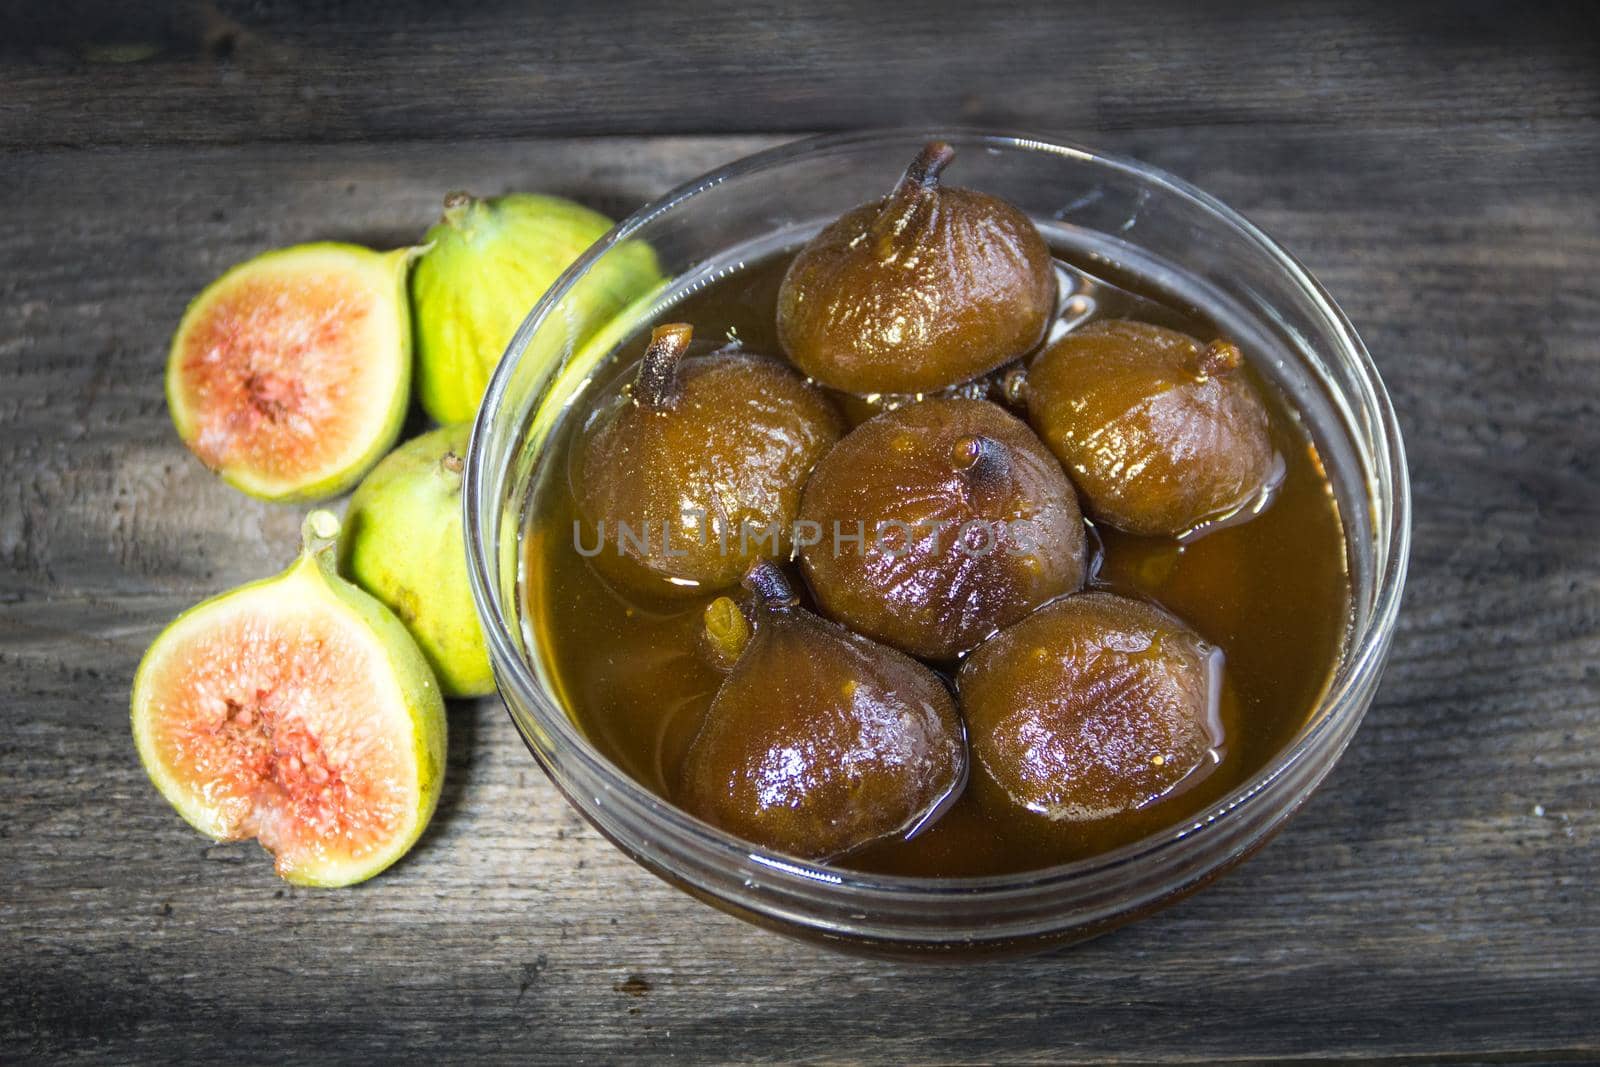 Figs in syrup . Dessert that is accompanied with fresh cheese and walnuts by GabrielaBertolini